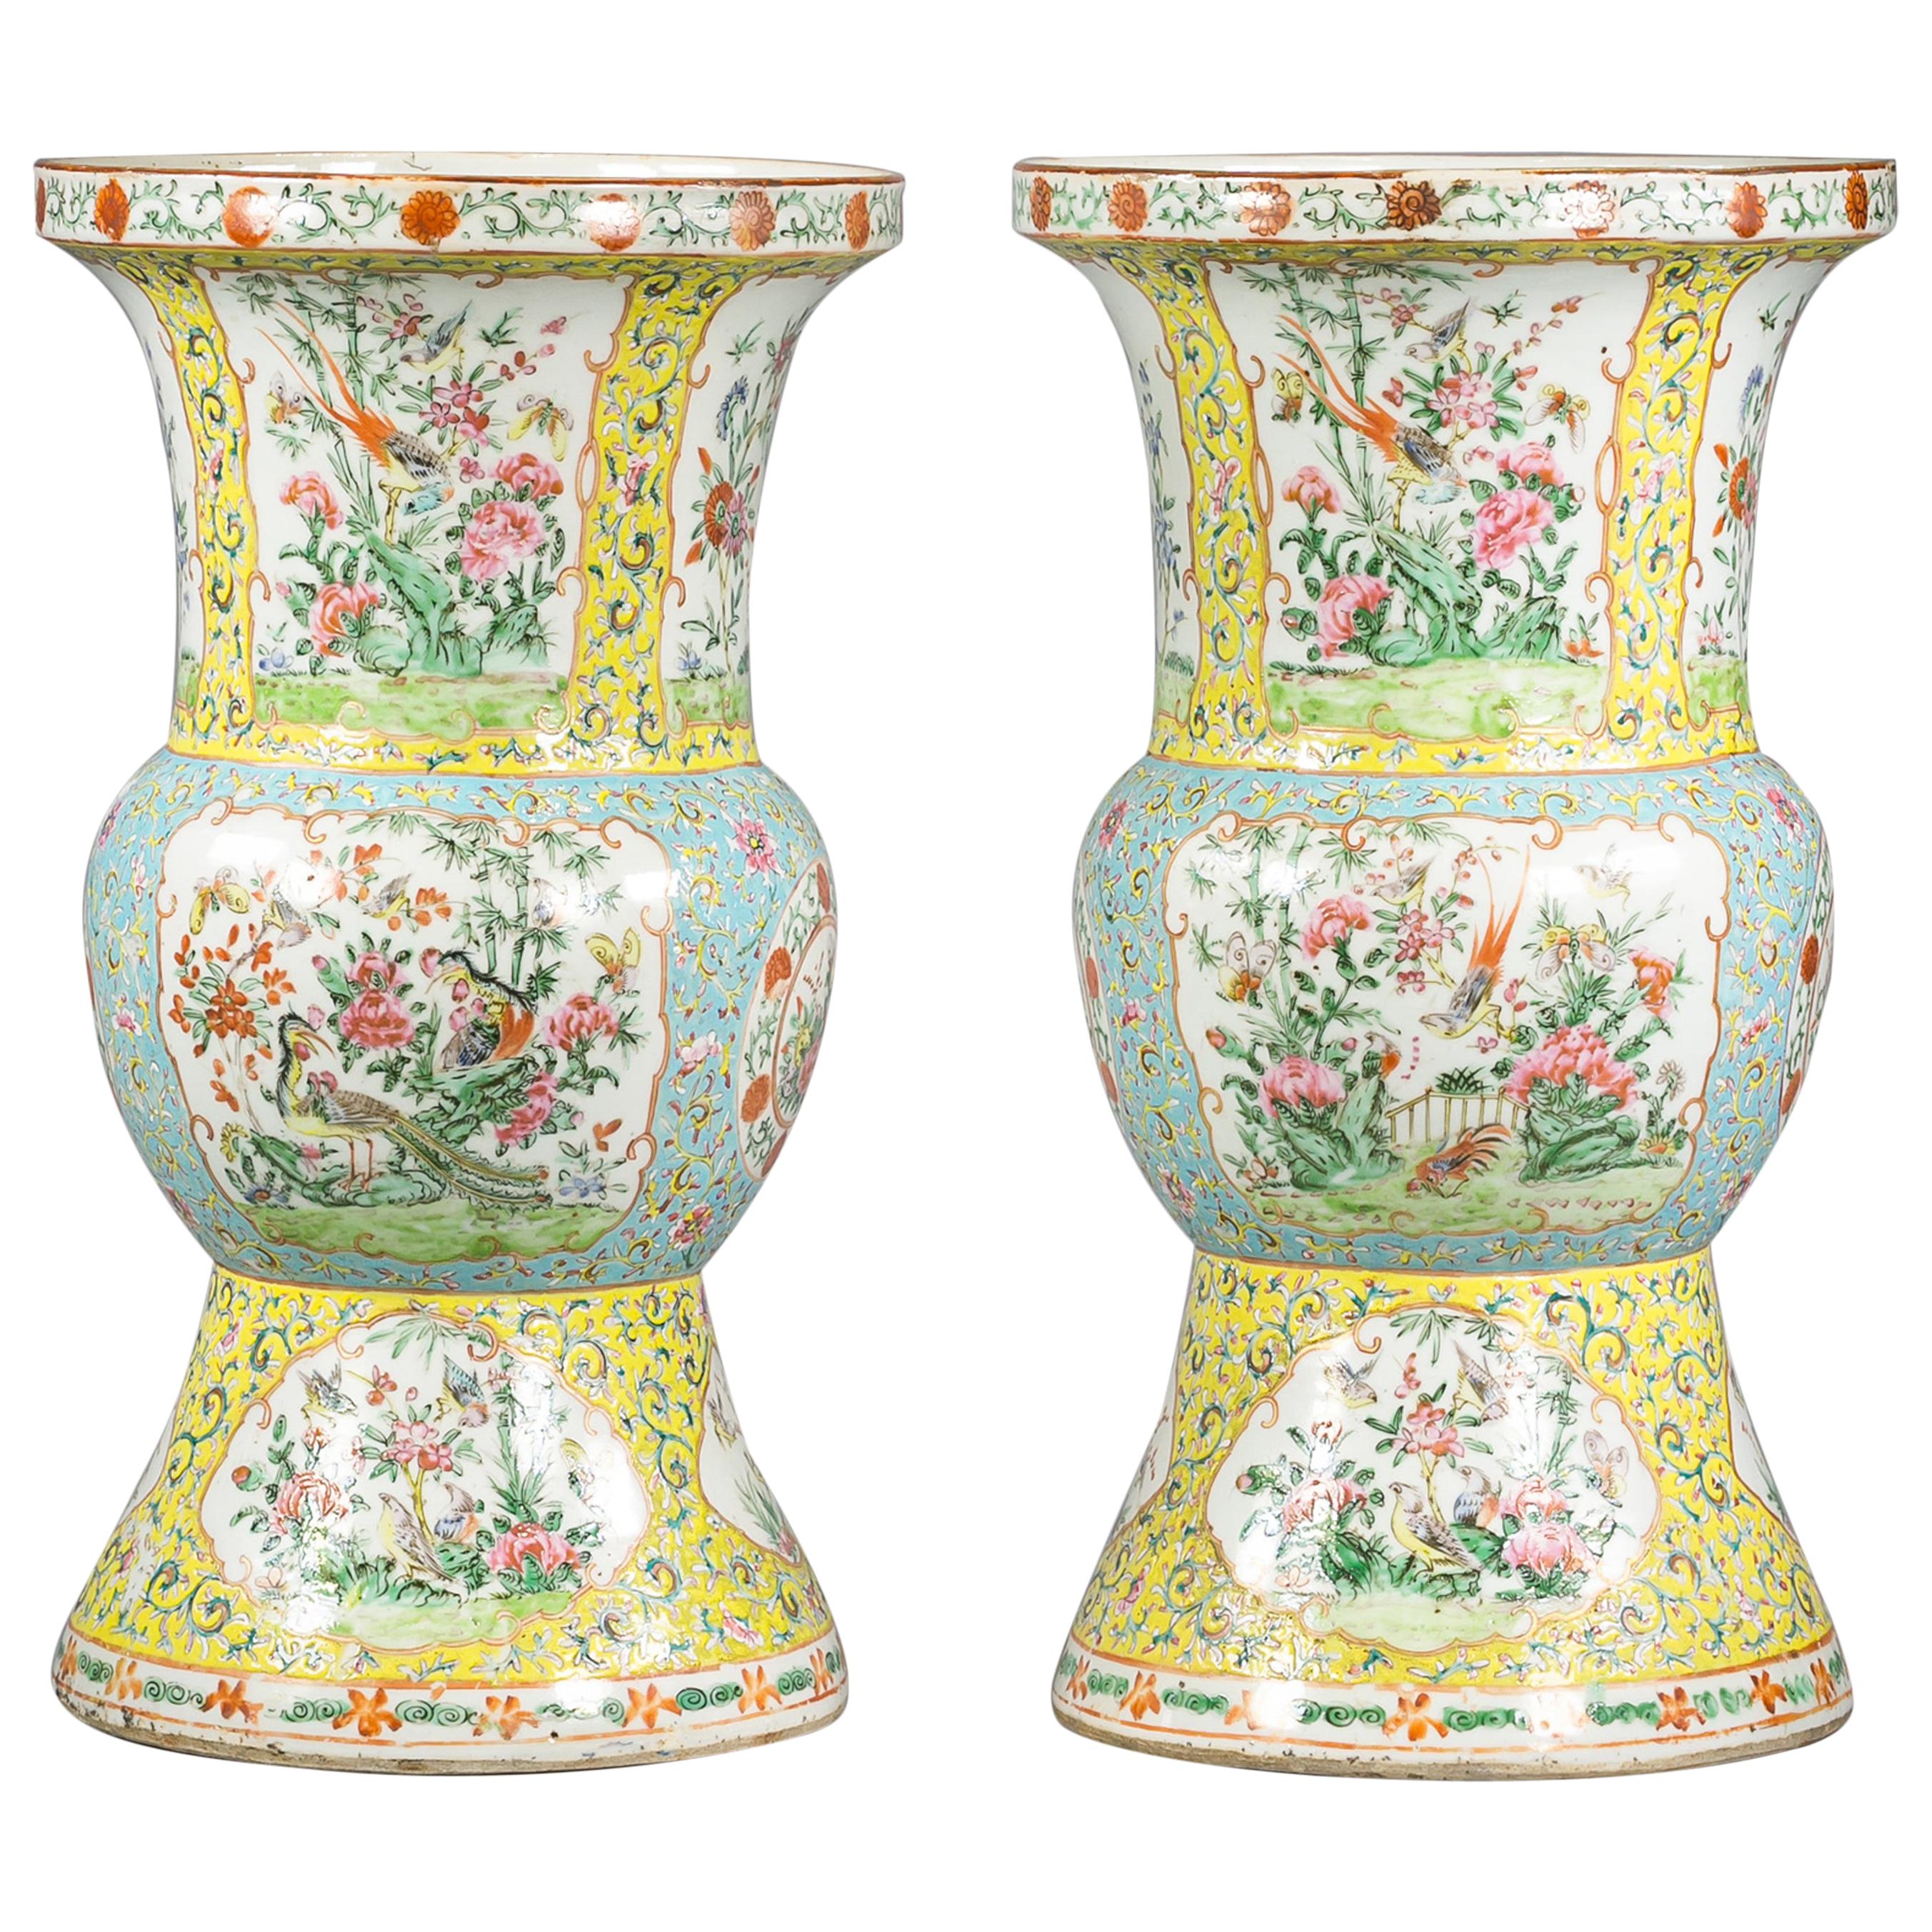 Pair of Chinese Porcelain Yellow Ground Famille Rose Vases, circa 1860